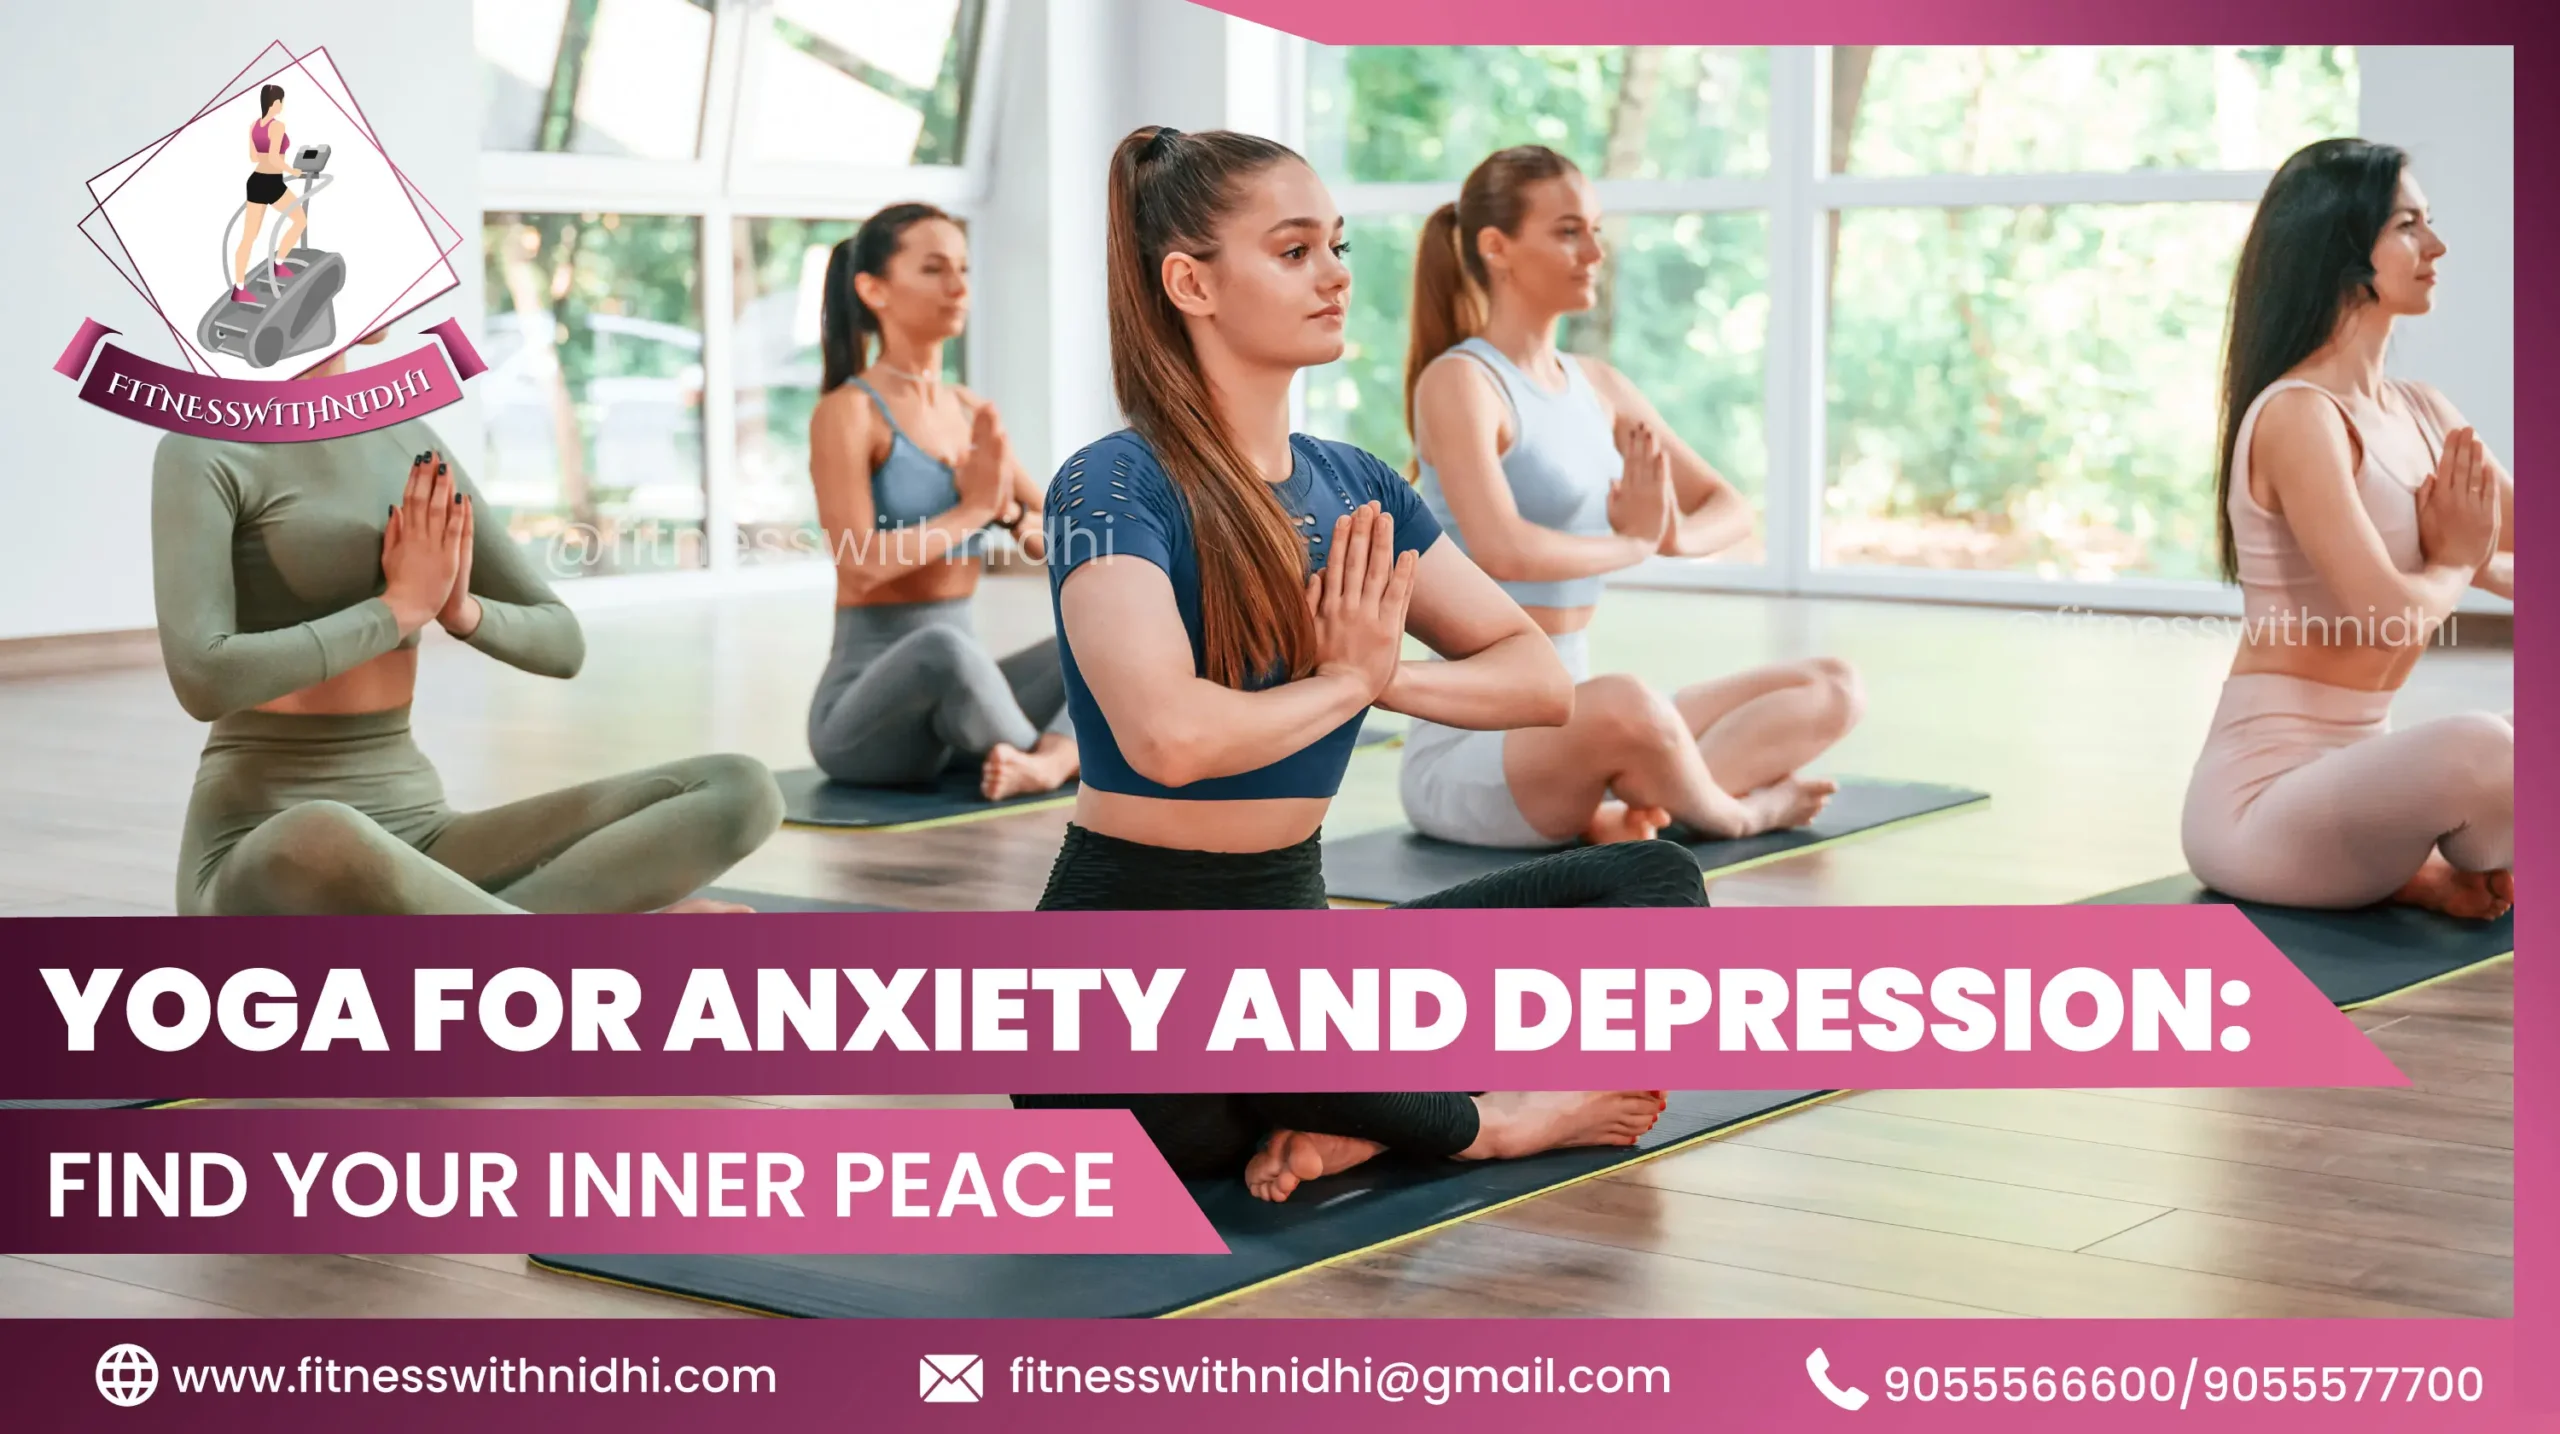 11benefits of yoga for anxiety and depression